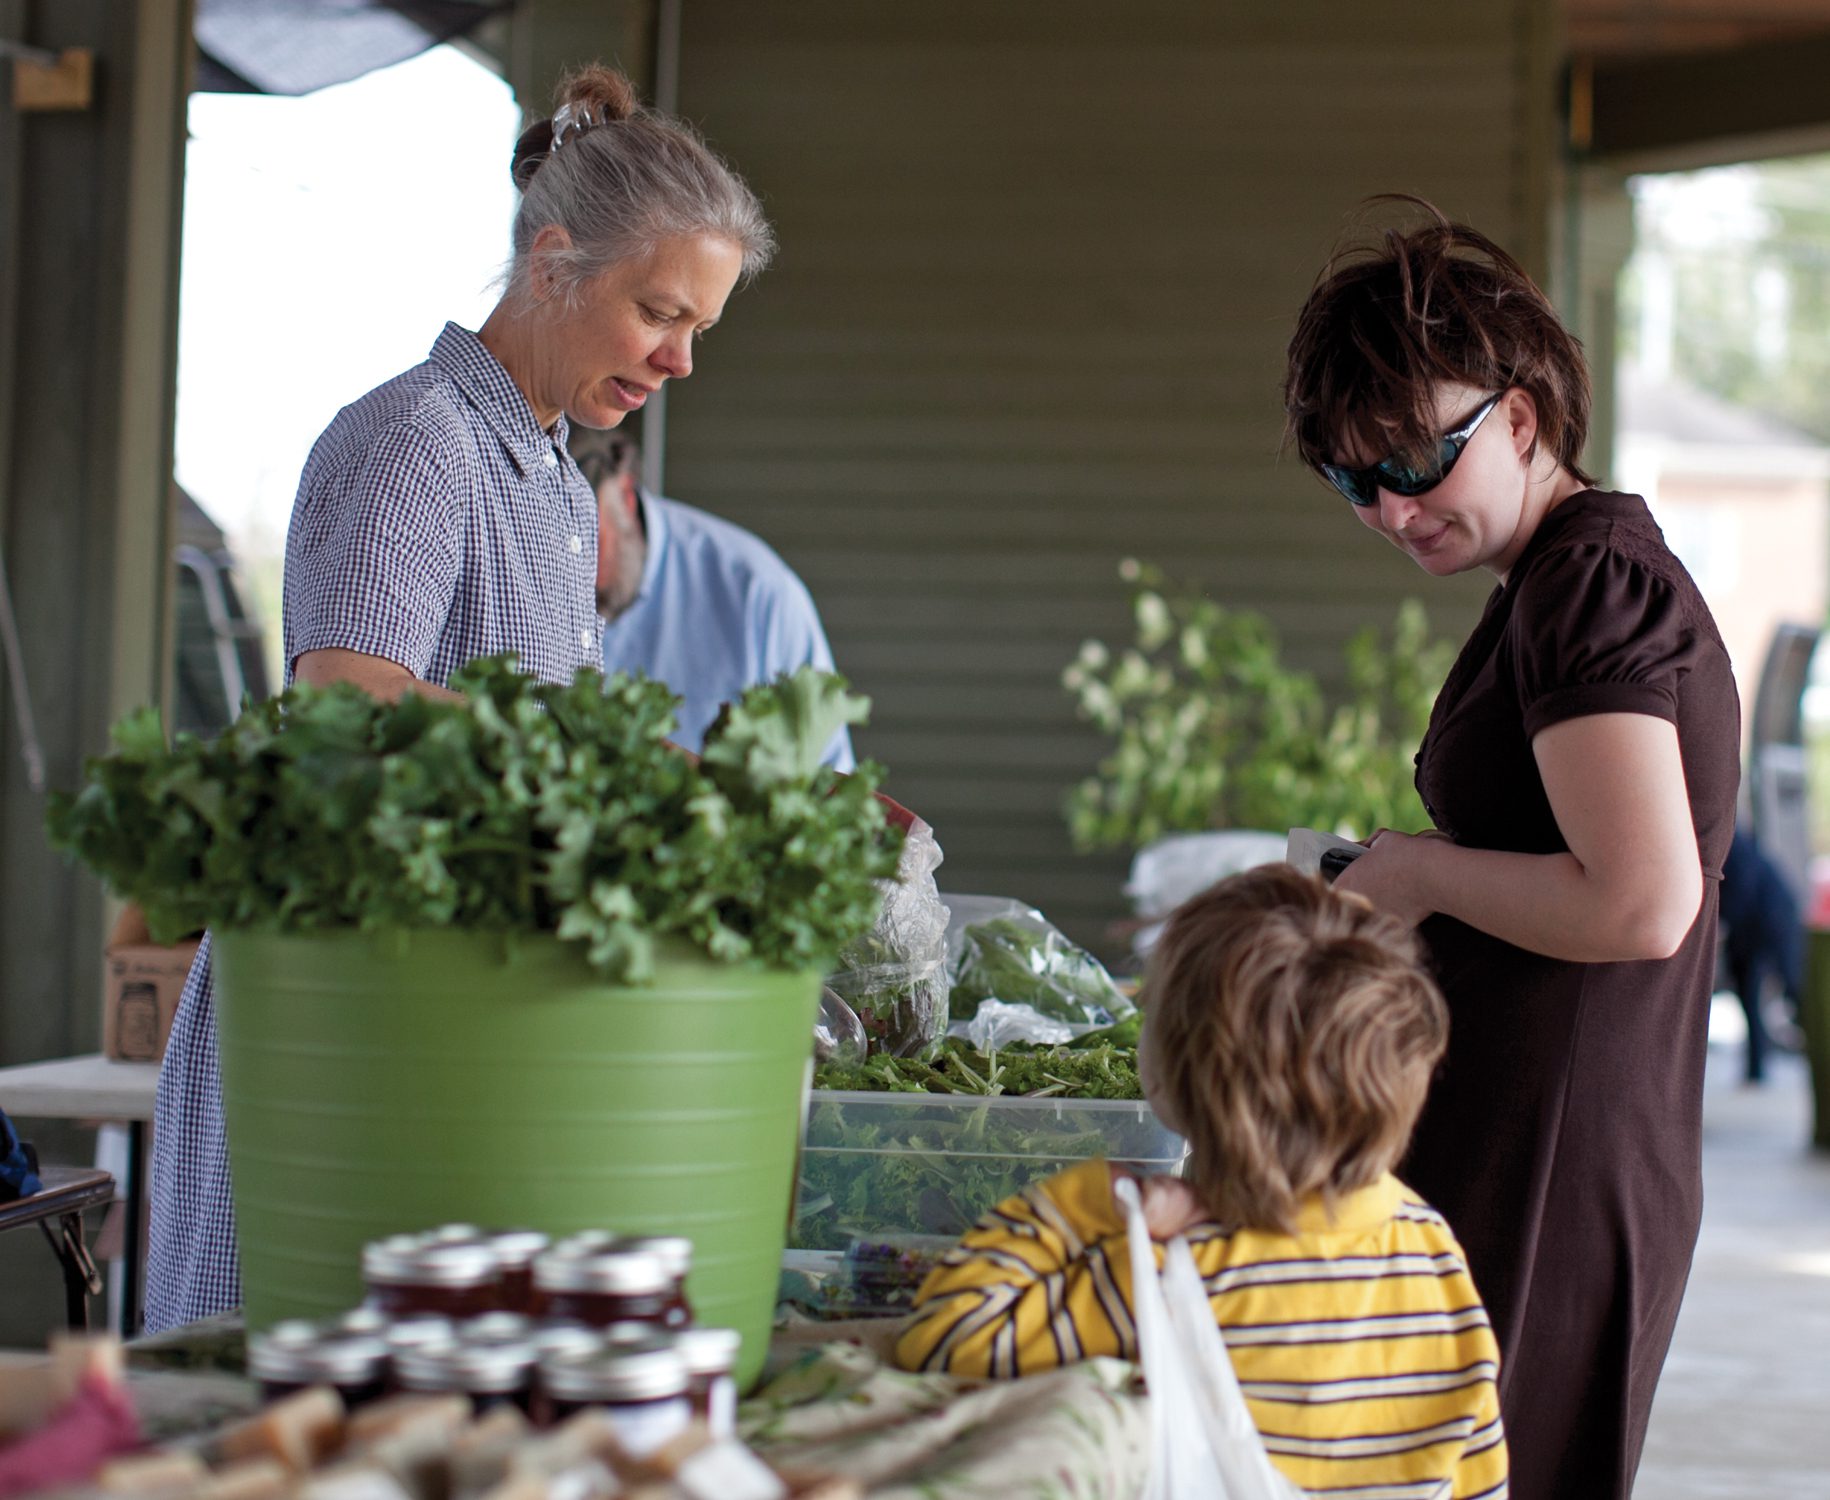 Marie Crise and her son shopping at a farmer's market in Abingdon, Va. . Laura Elizabeth Pohl/Bread for the World.